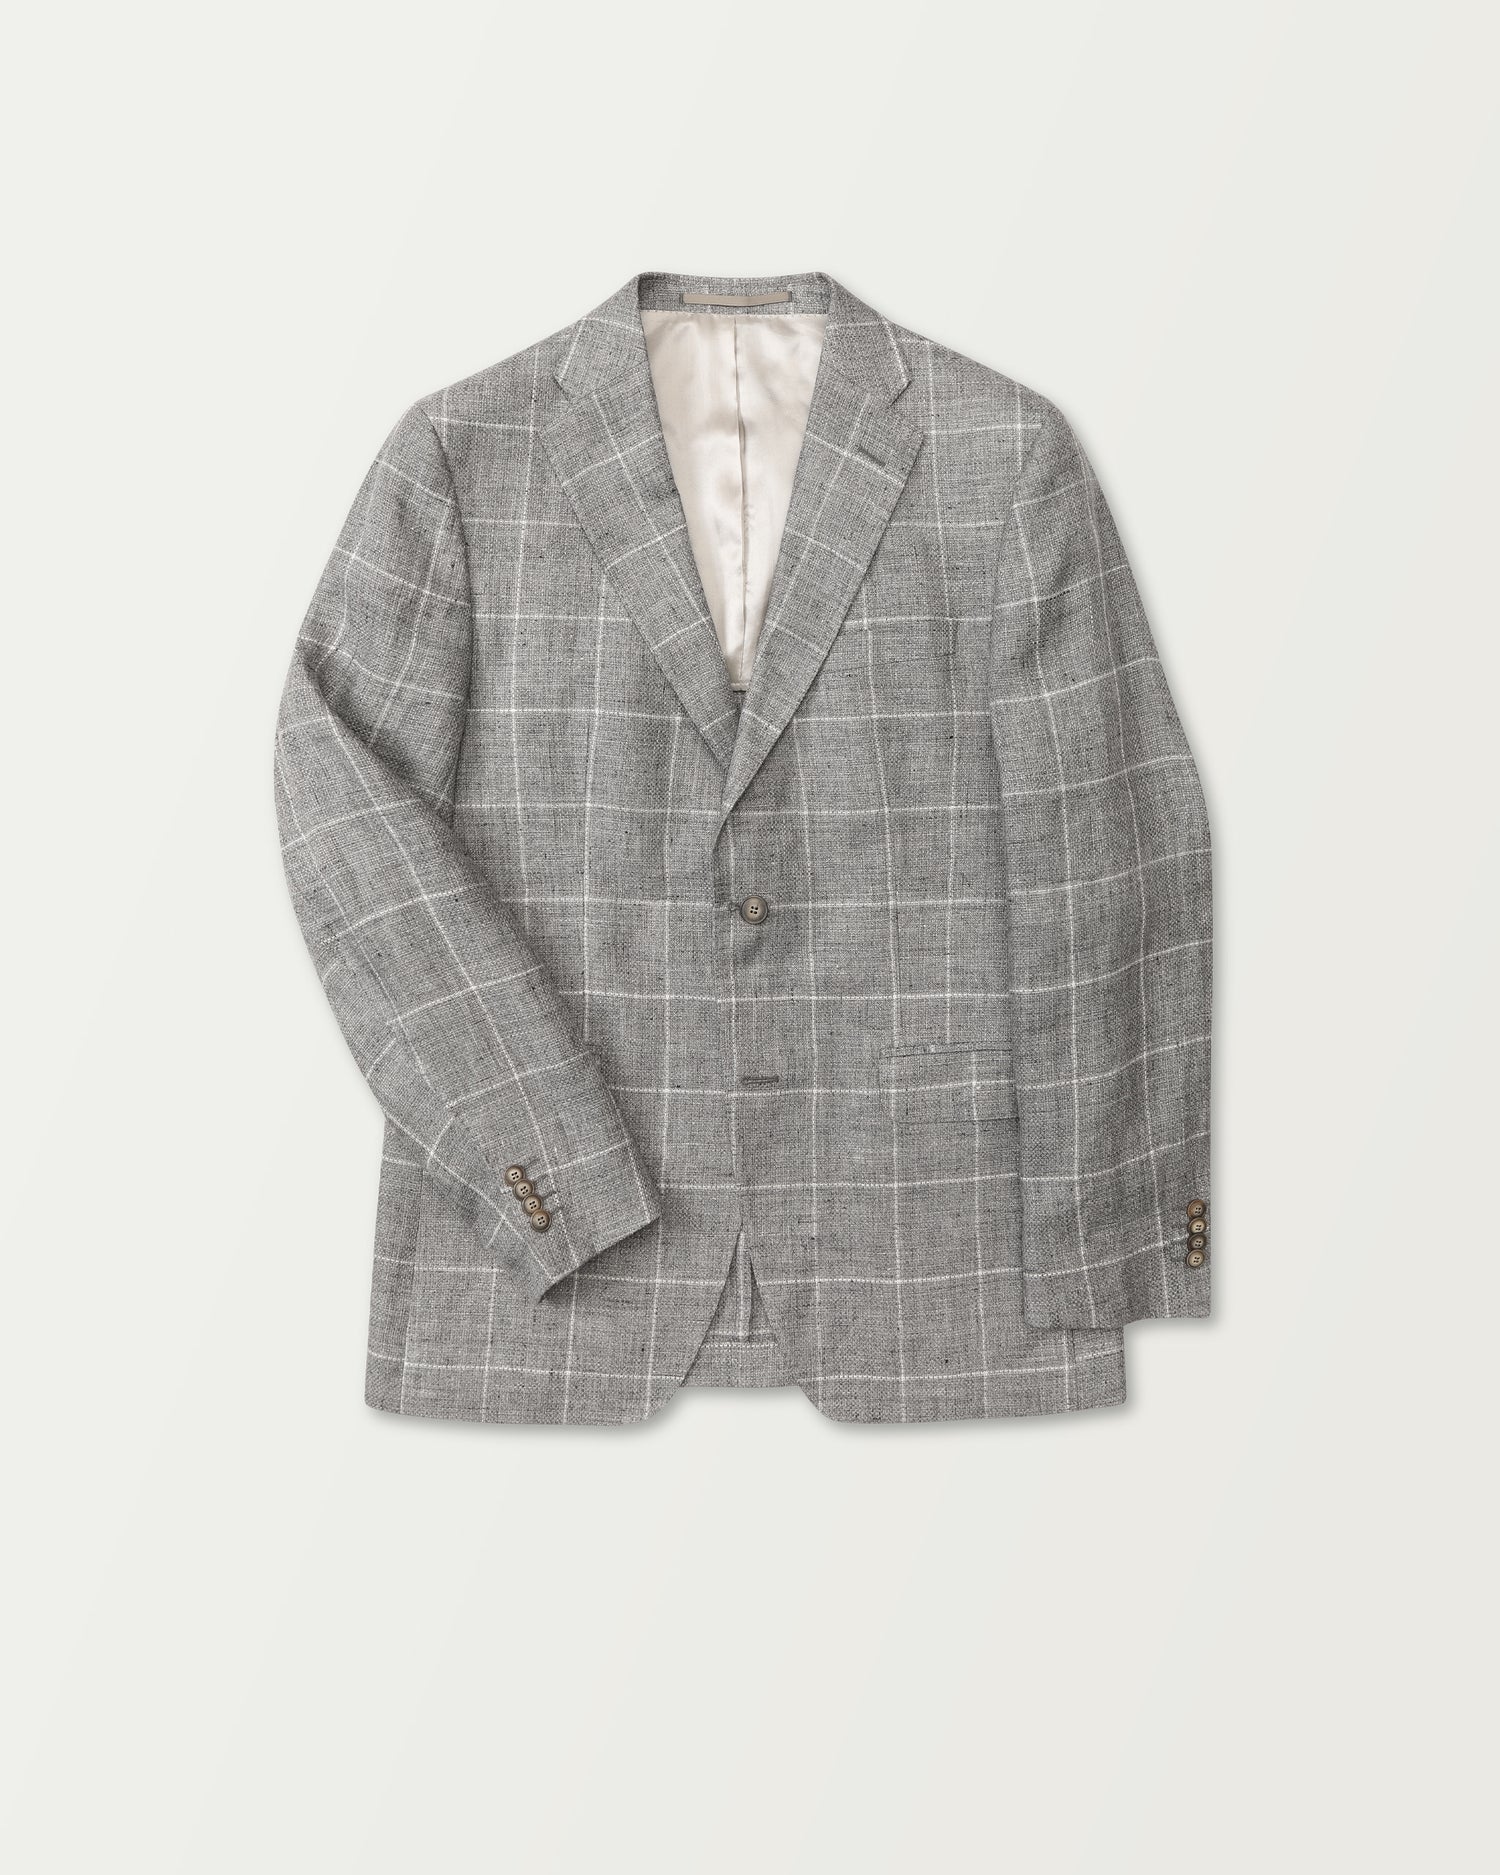 Relaxed Linen Jacket in Grey (8624942186826)